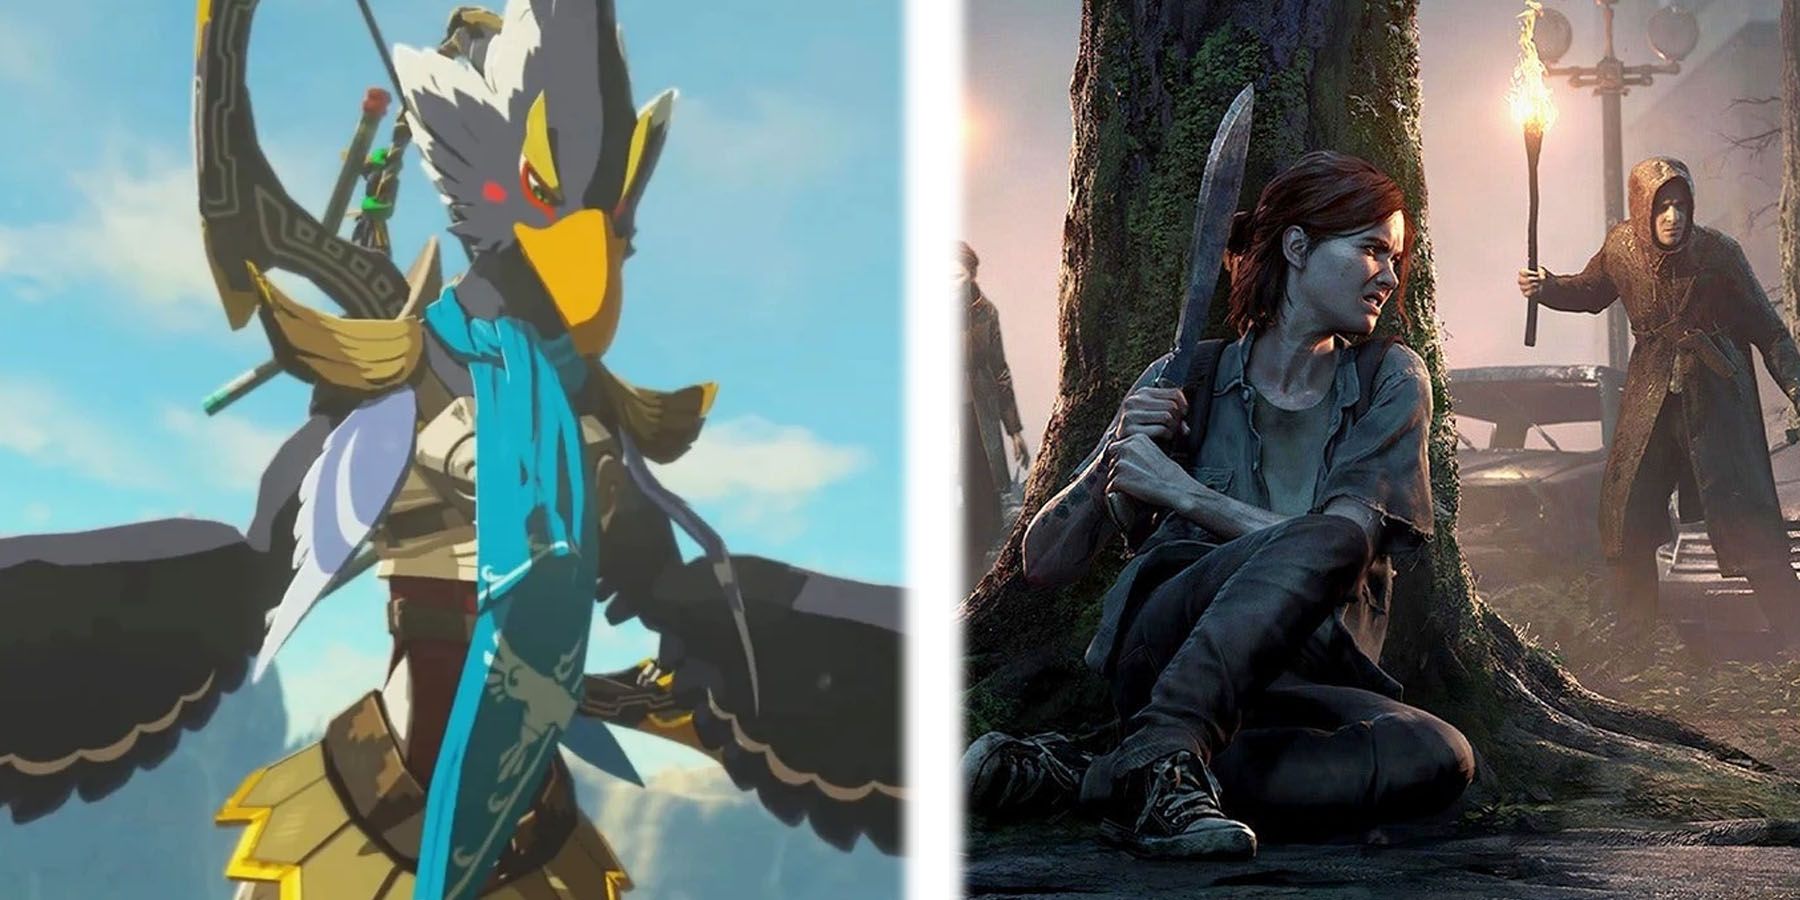 Breath of the Wild 2 voice actor spills new character details